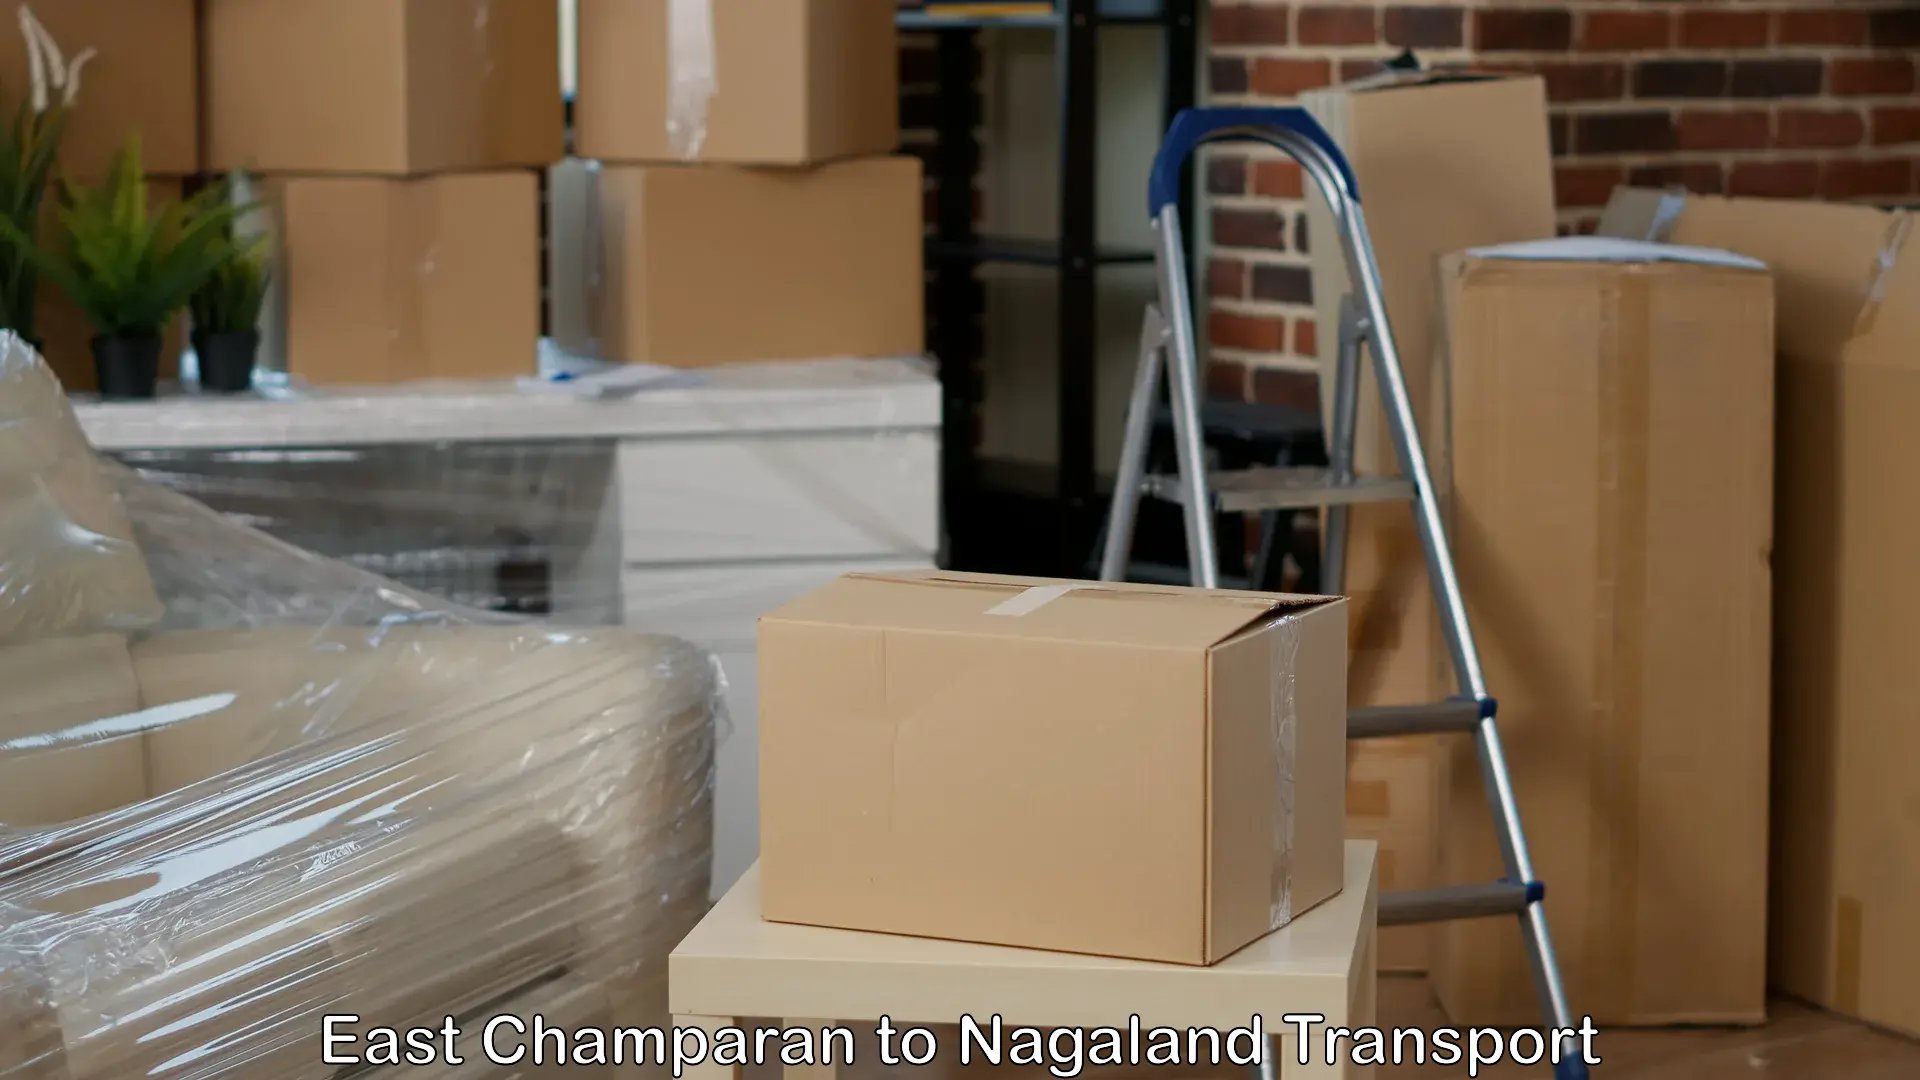 Vehicle transport services East Champaran to Nagaland